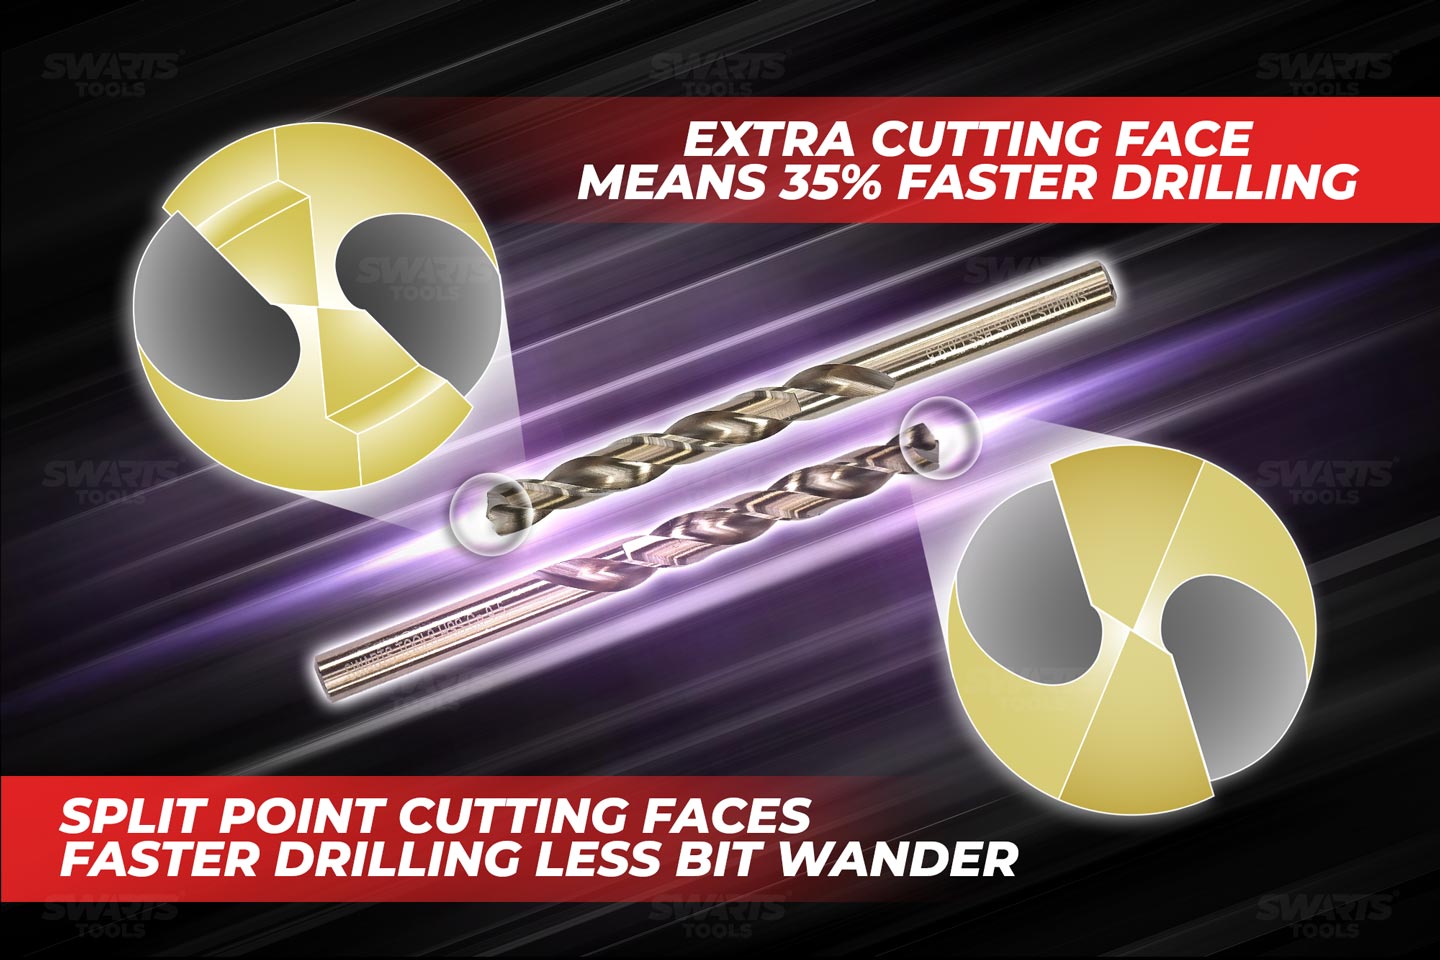 Extra cutting faces means 35% faster drilling